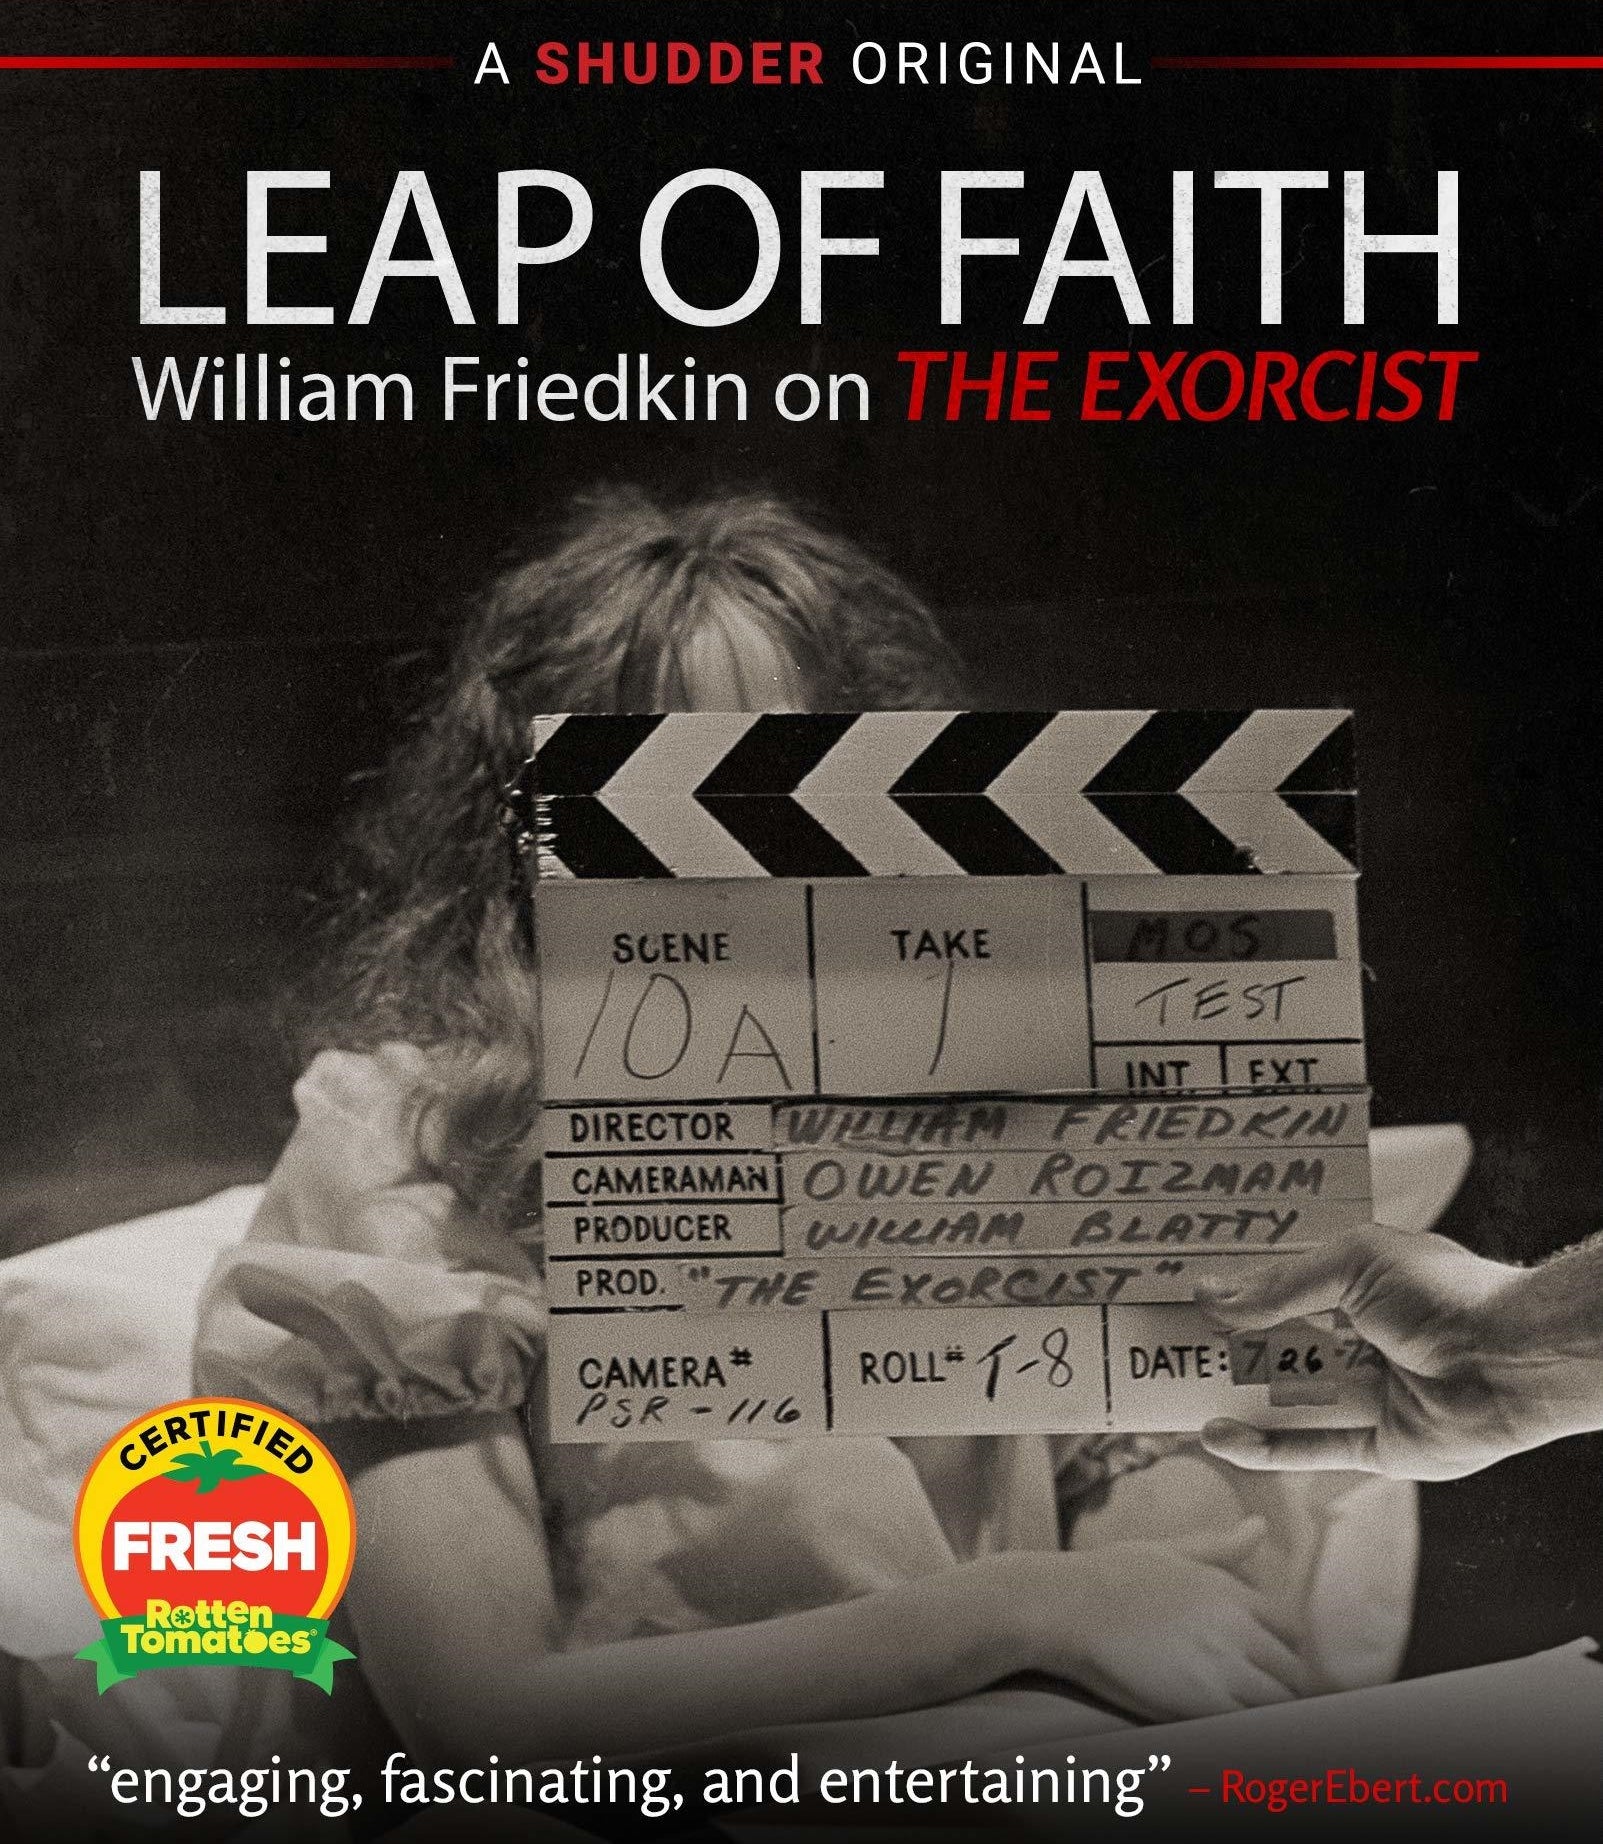 LEAP OF FAITH: WILLIAM FRIEDKIN ON THE EXORCIST BLU-RAY